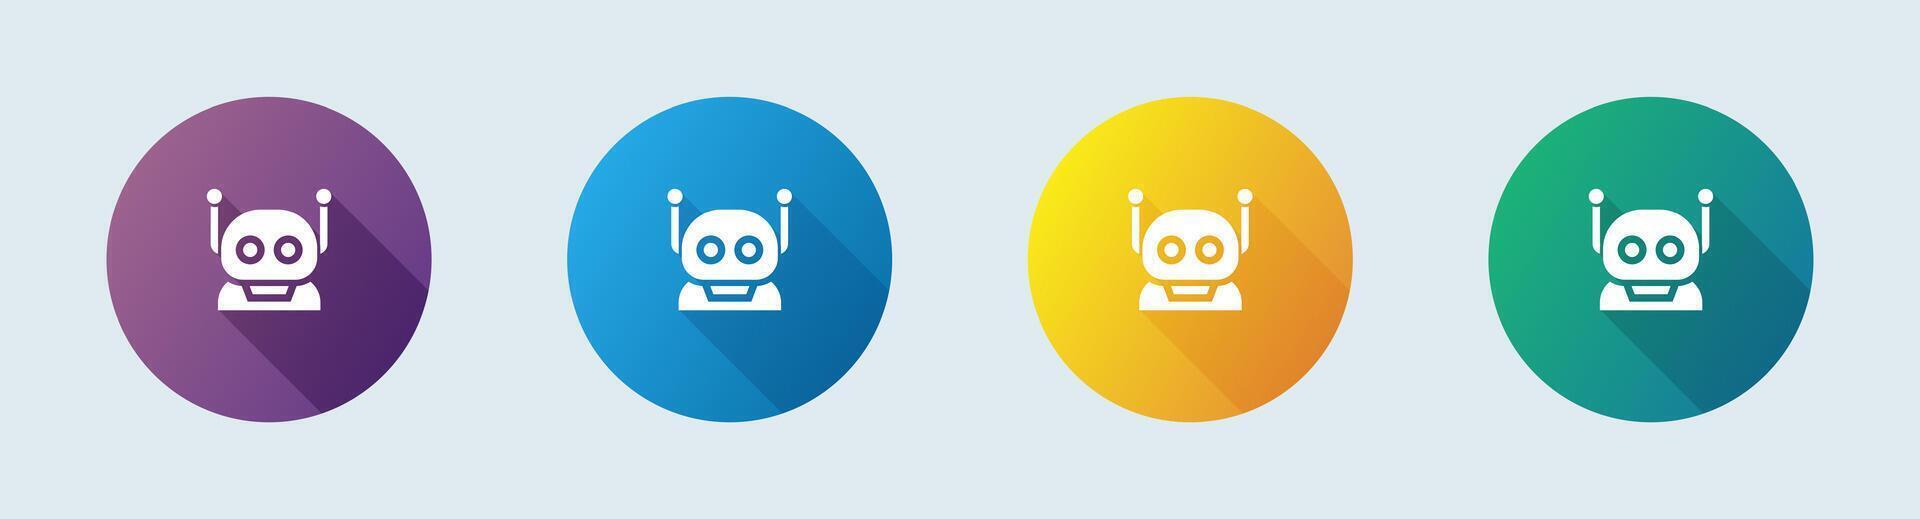 Robot solid icon in flat design style. Artificial intelligence signs vector illustration.